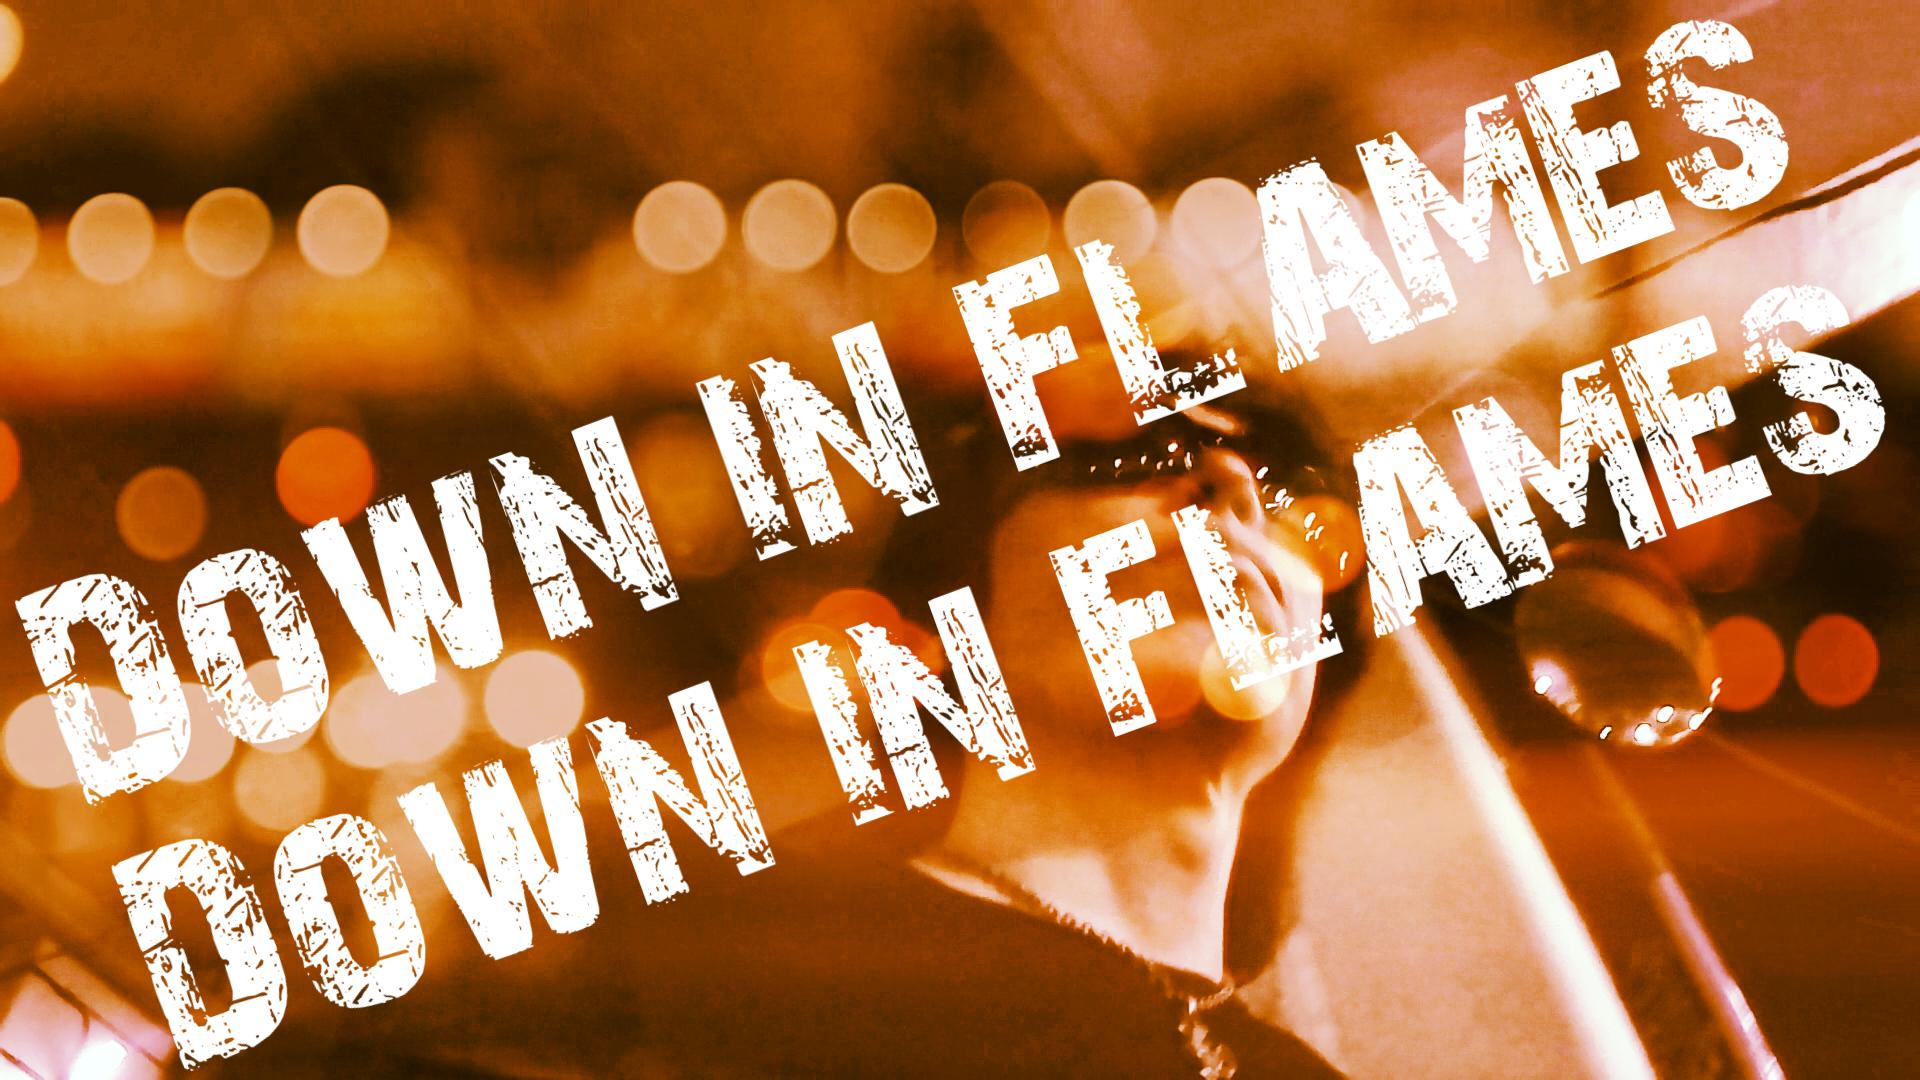 Down in Flames (Dead Boys cover)